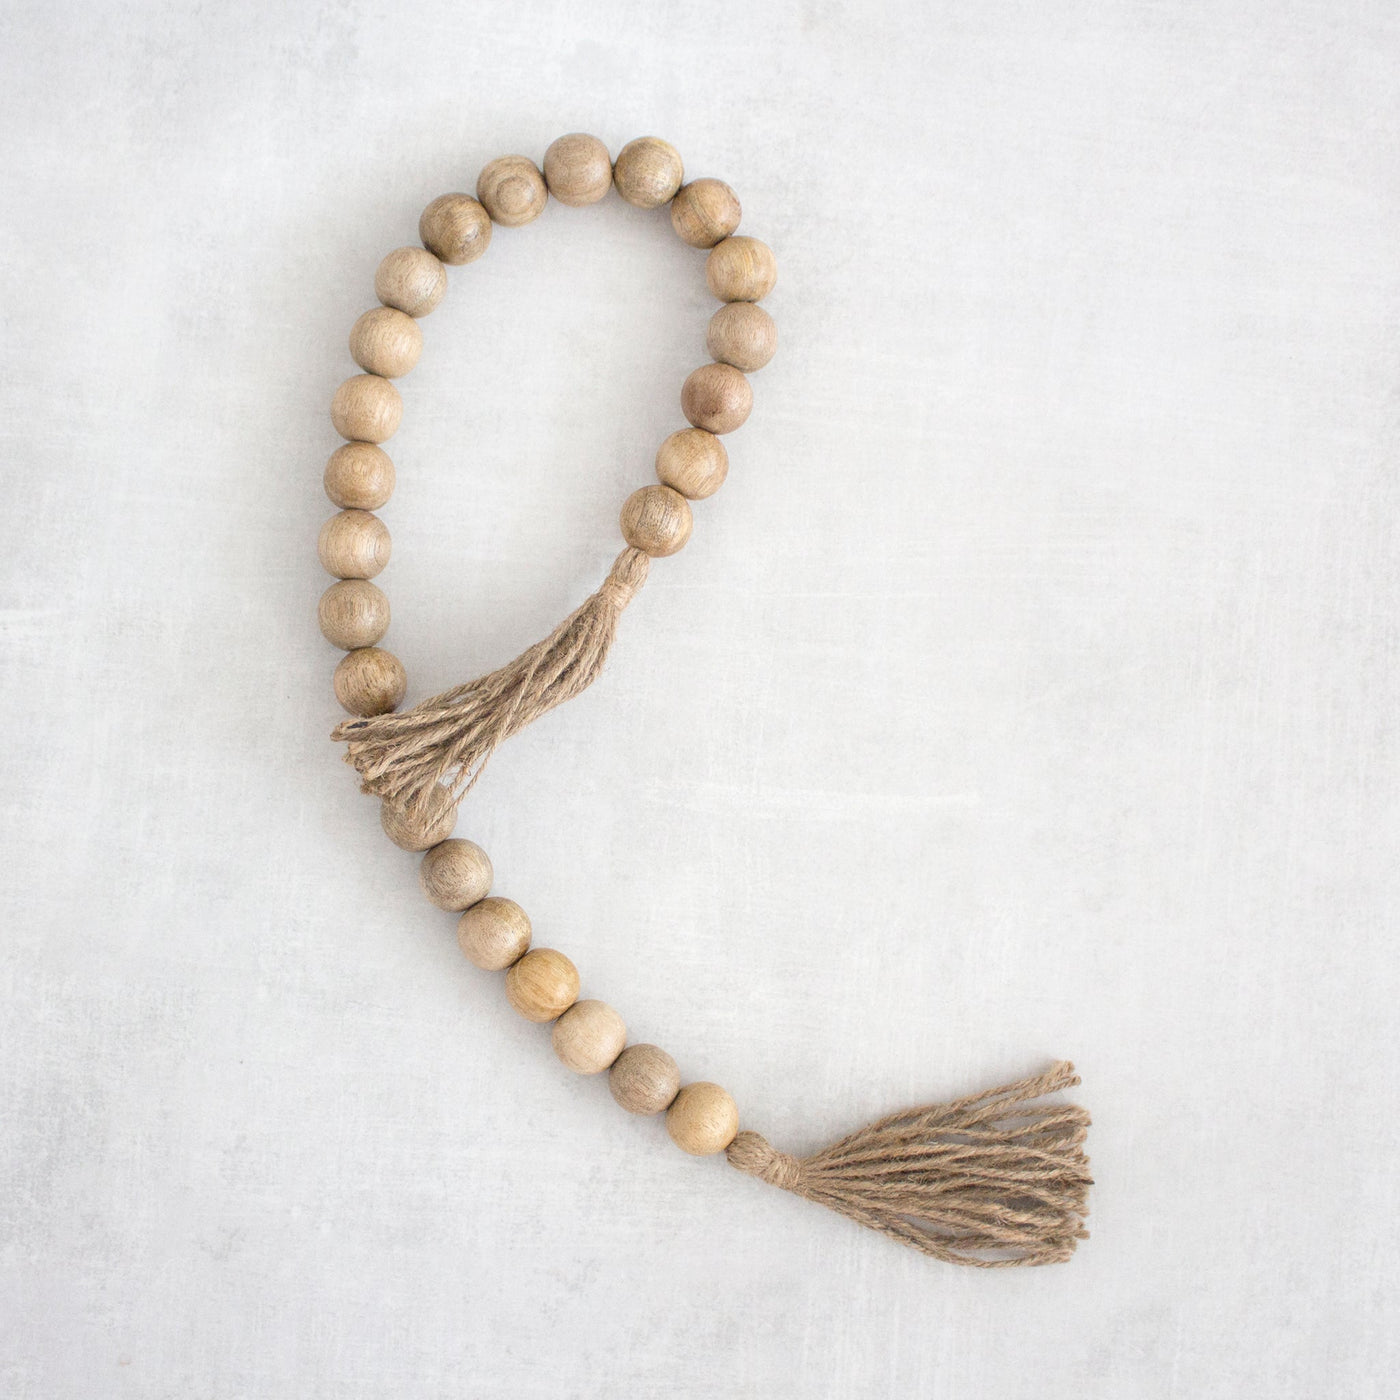 #2 Wooden Bead Garland with Tassels